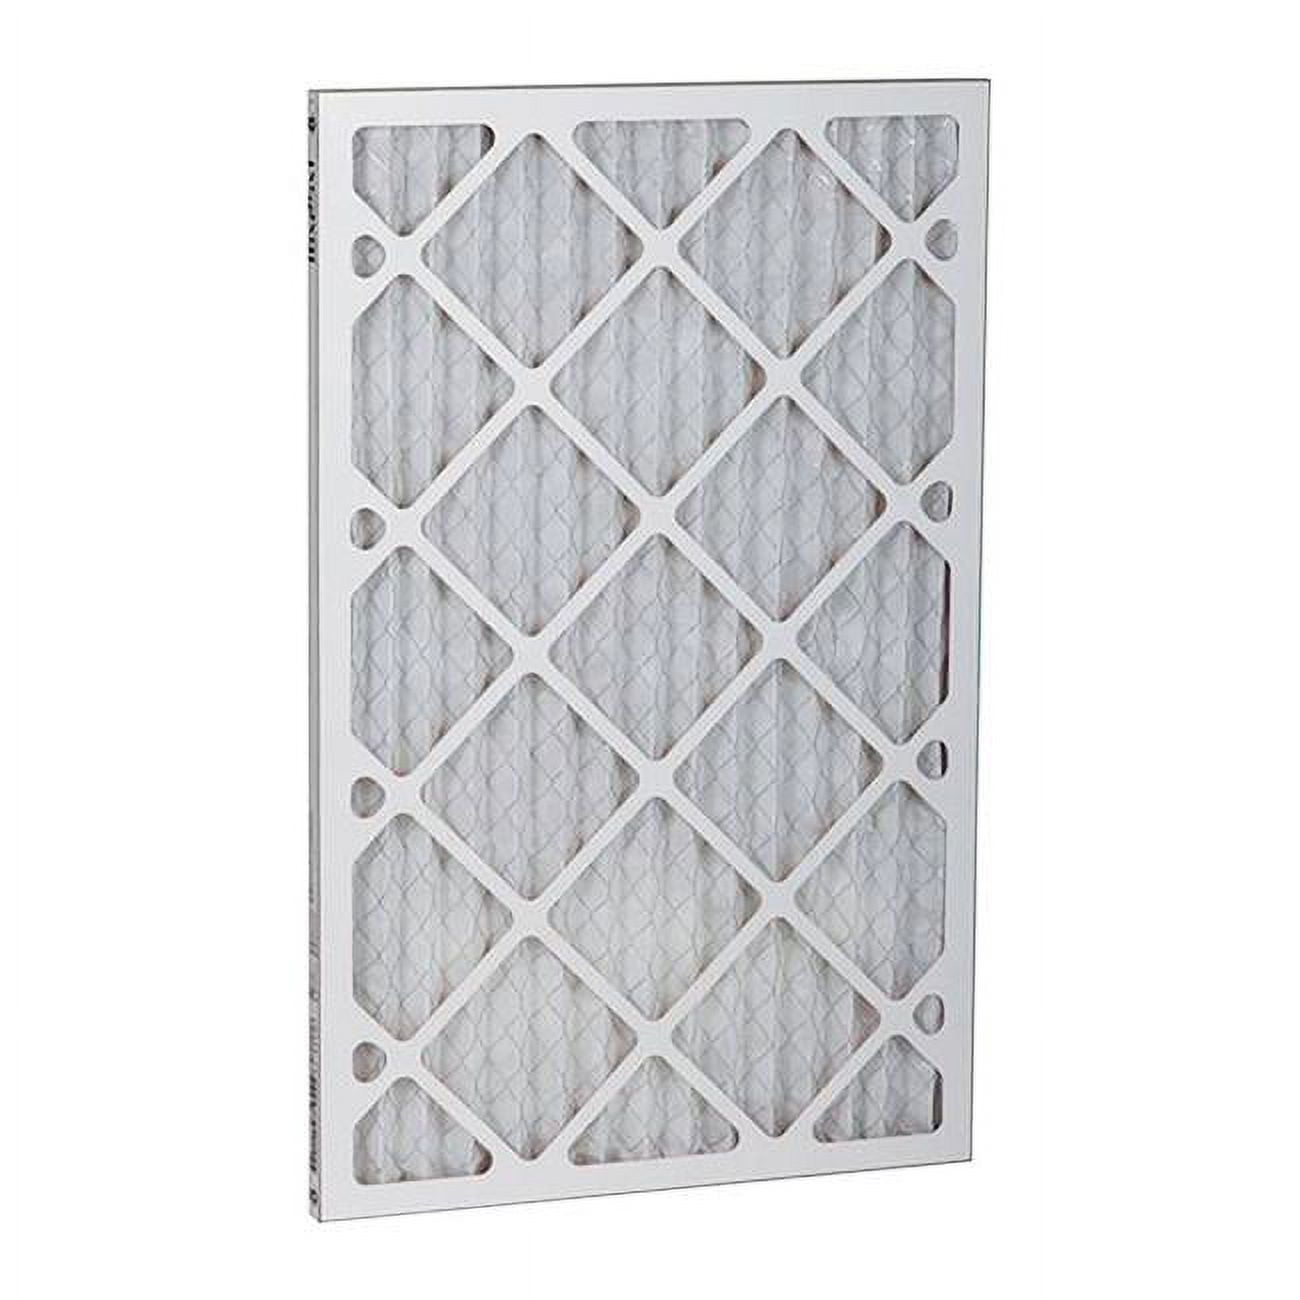 Picture of Best Air 4823324 20 x 20 x 1 in. 8 MERV Air Filter - Case of 12